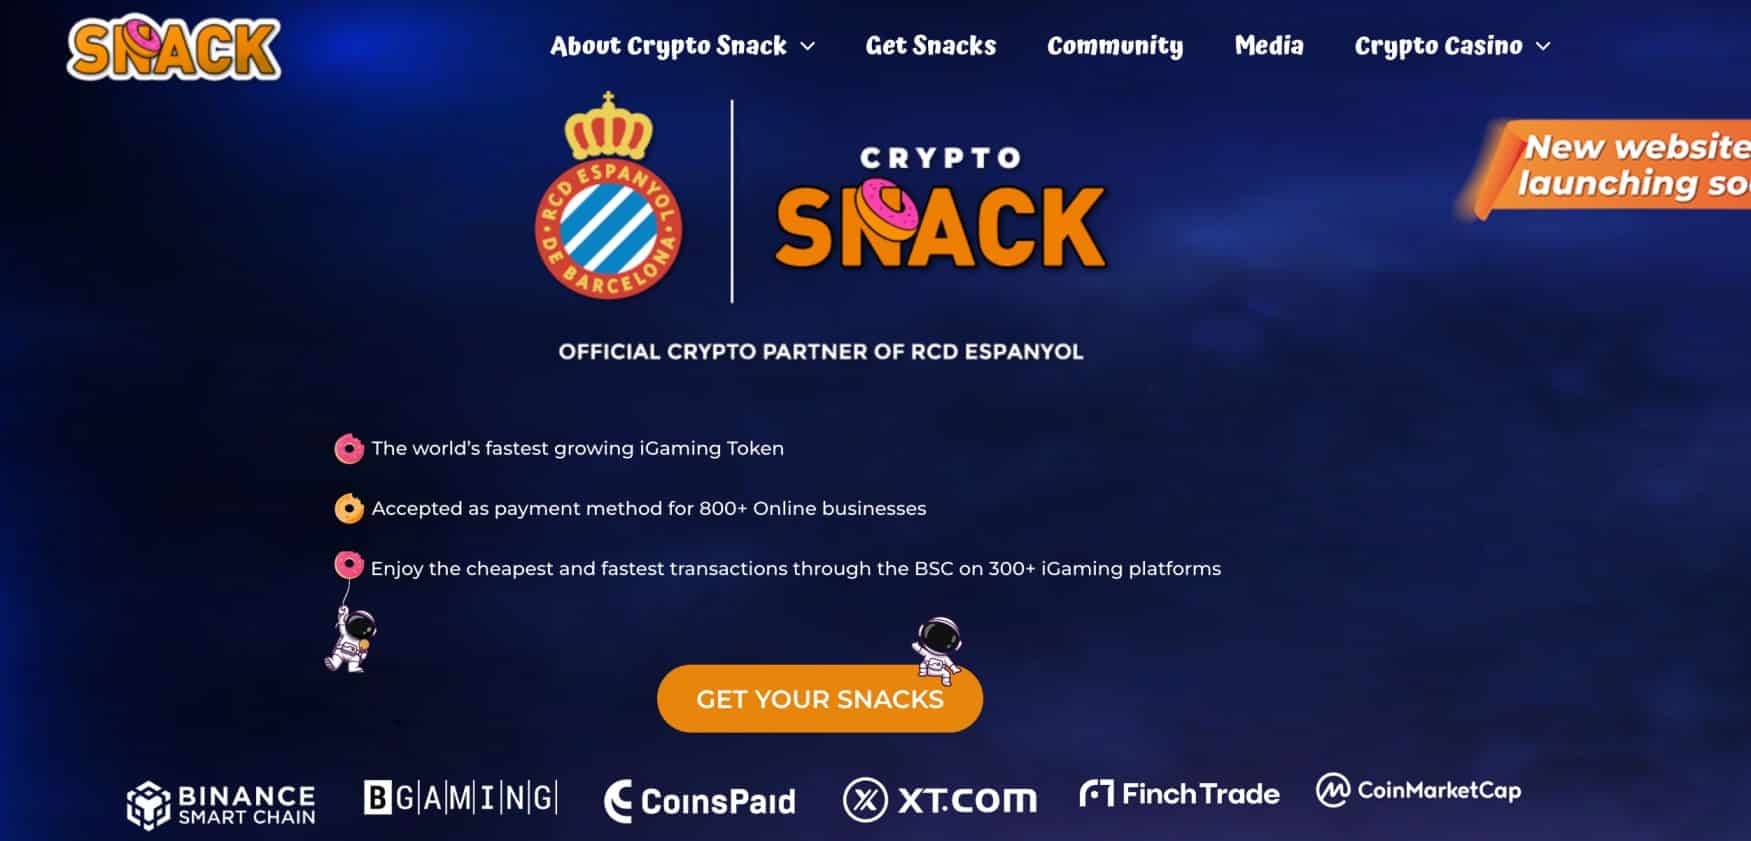 Crypto Snack review